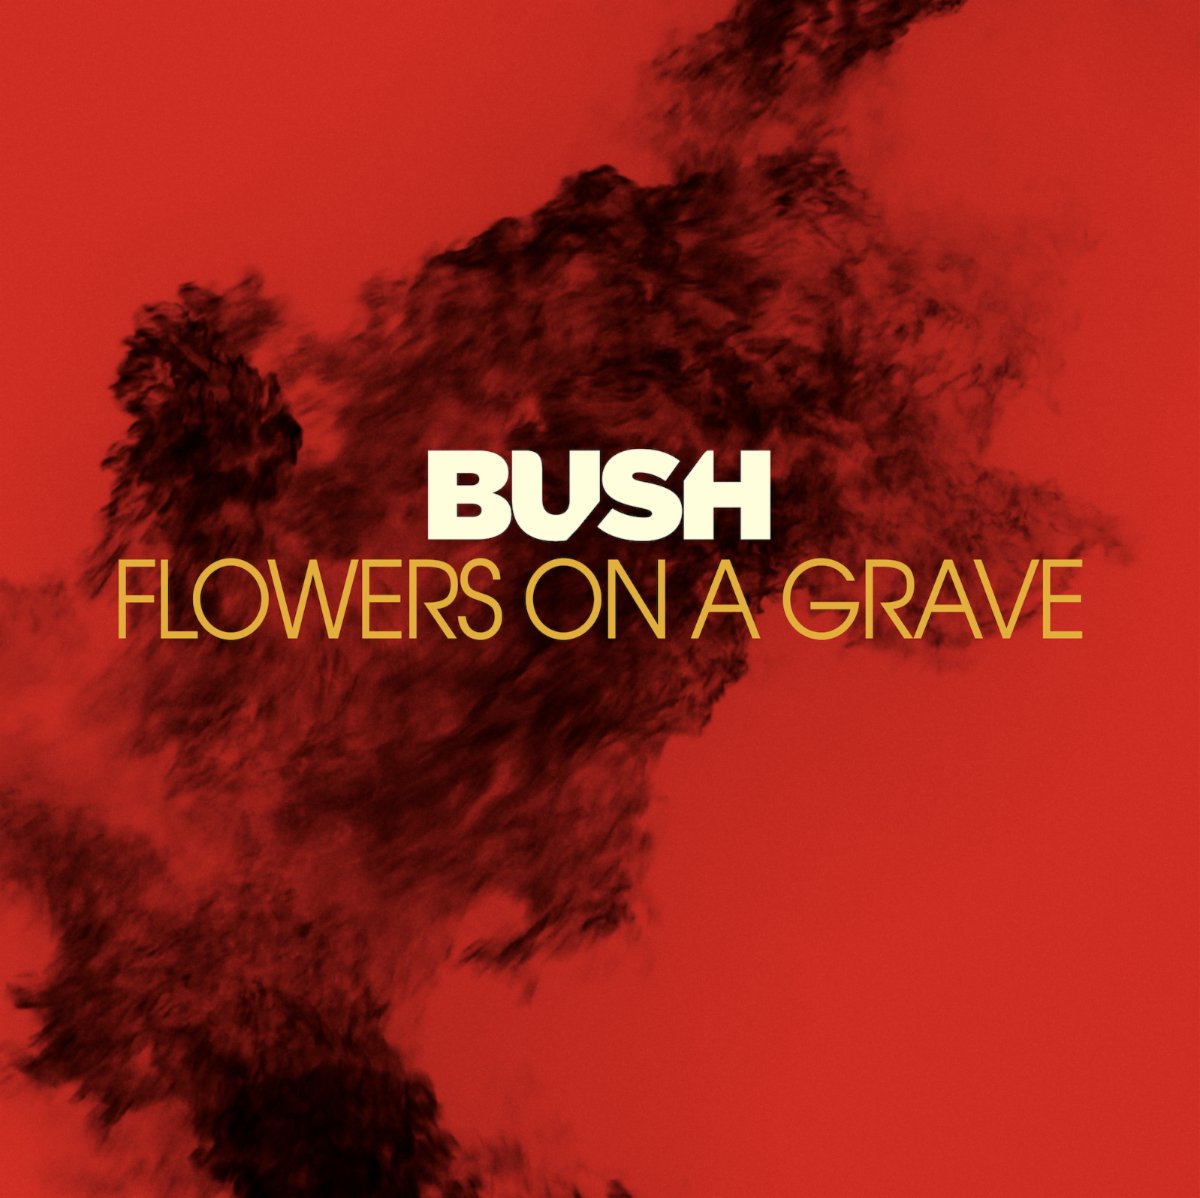 BUSH TO RELEASE NEW ALBUM THE KINGDOM MAY 2020 - LISTEN TO NEW SINGLE "FLOWERS ON A GRAVE" HERE